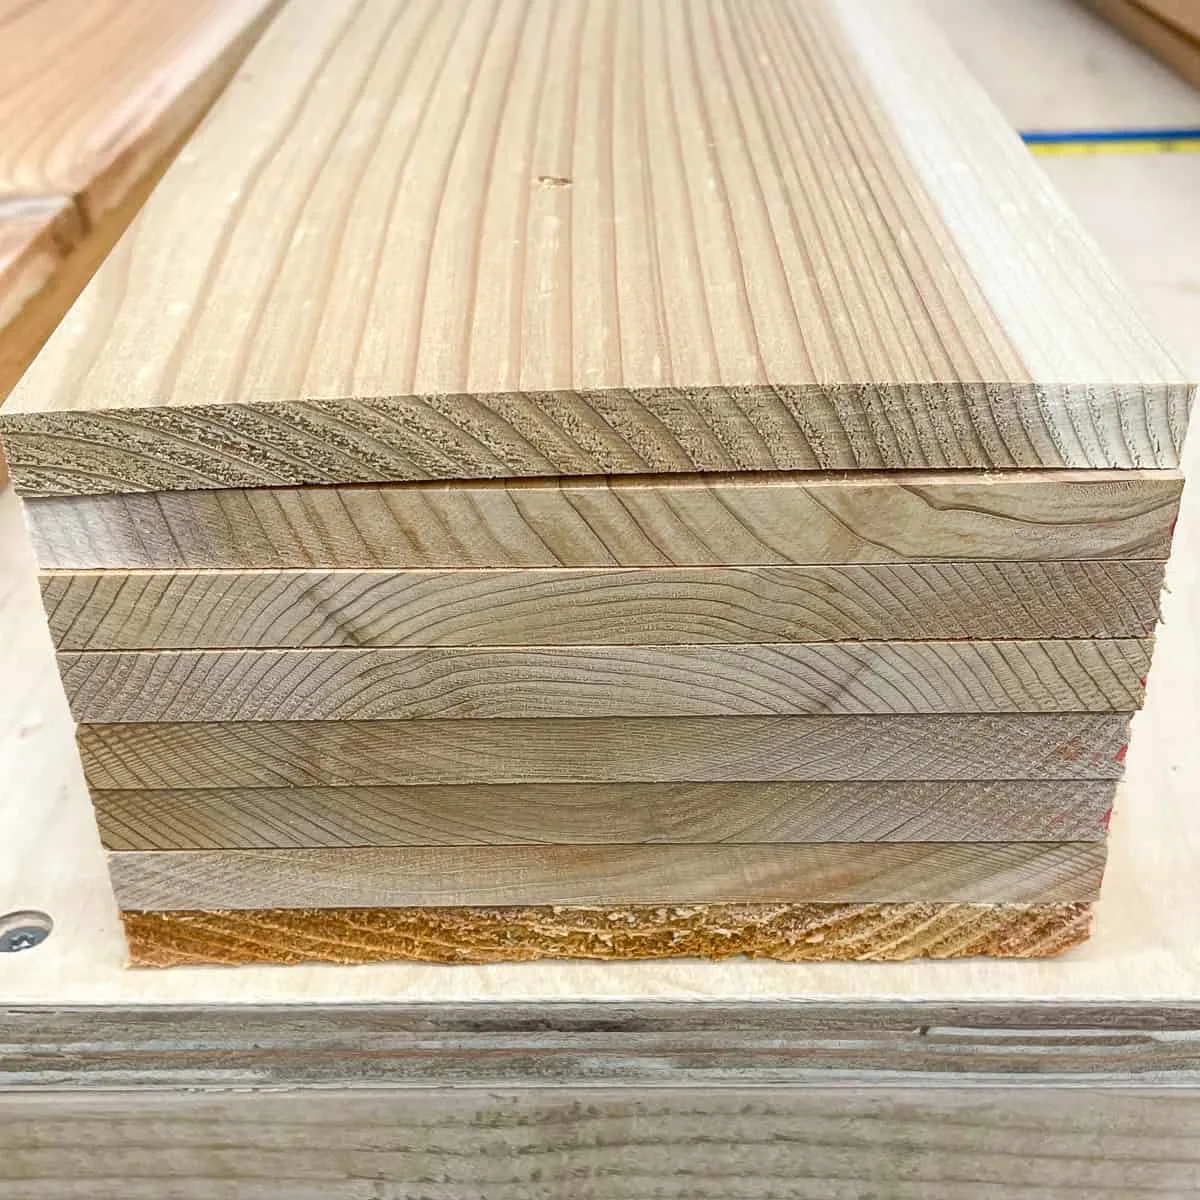 cedar fence pickets in a stack